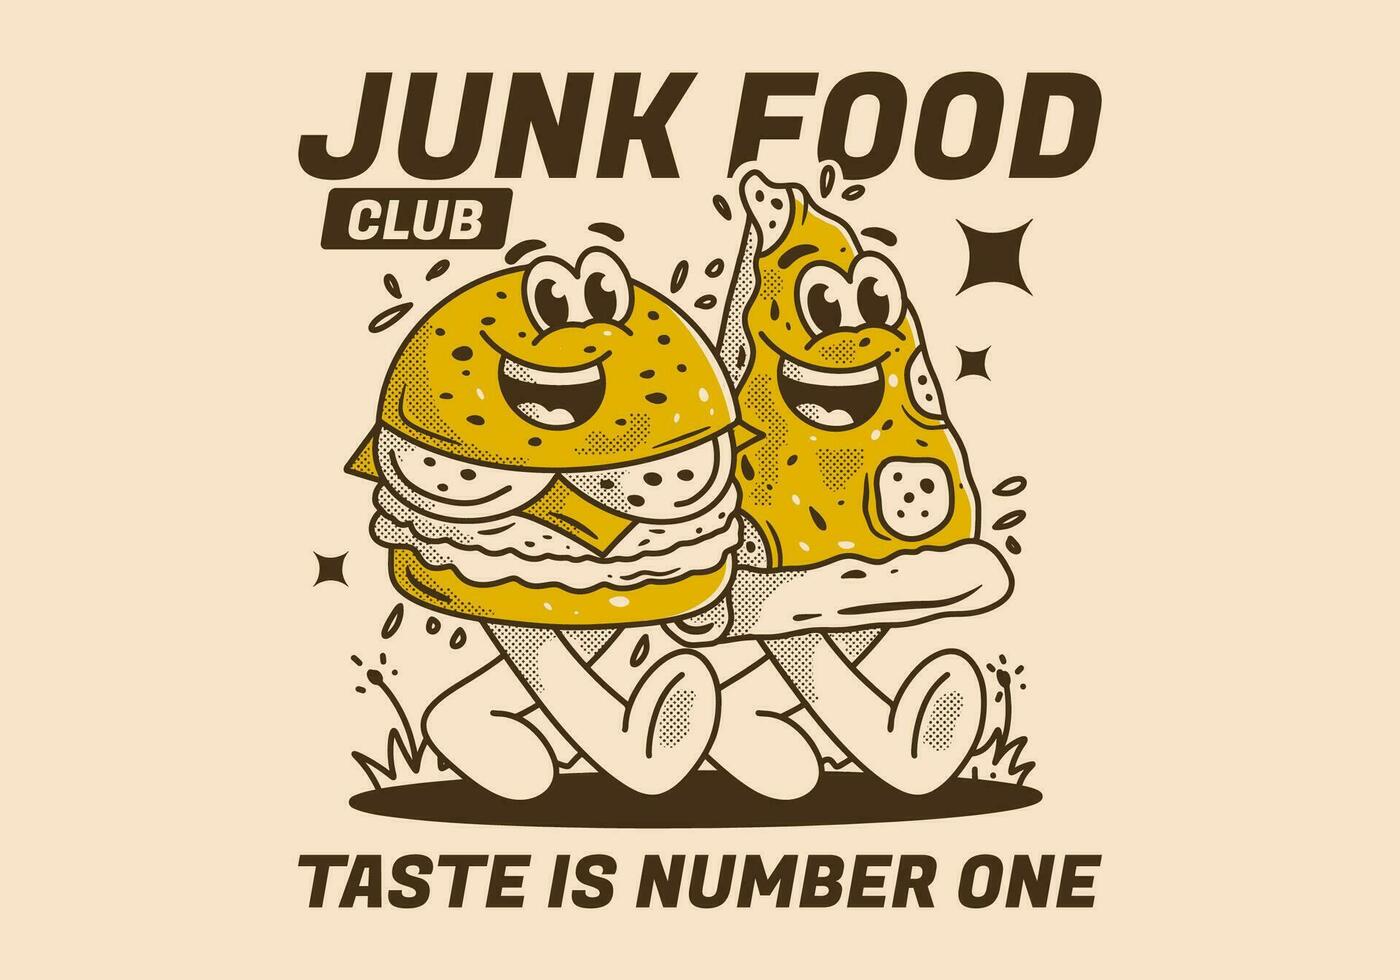 Junk Food club, taste is number one. Character illustration of walking burger and pizza vector